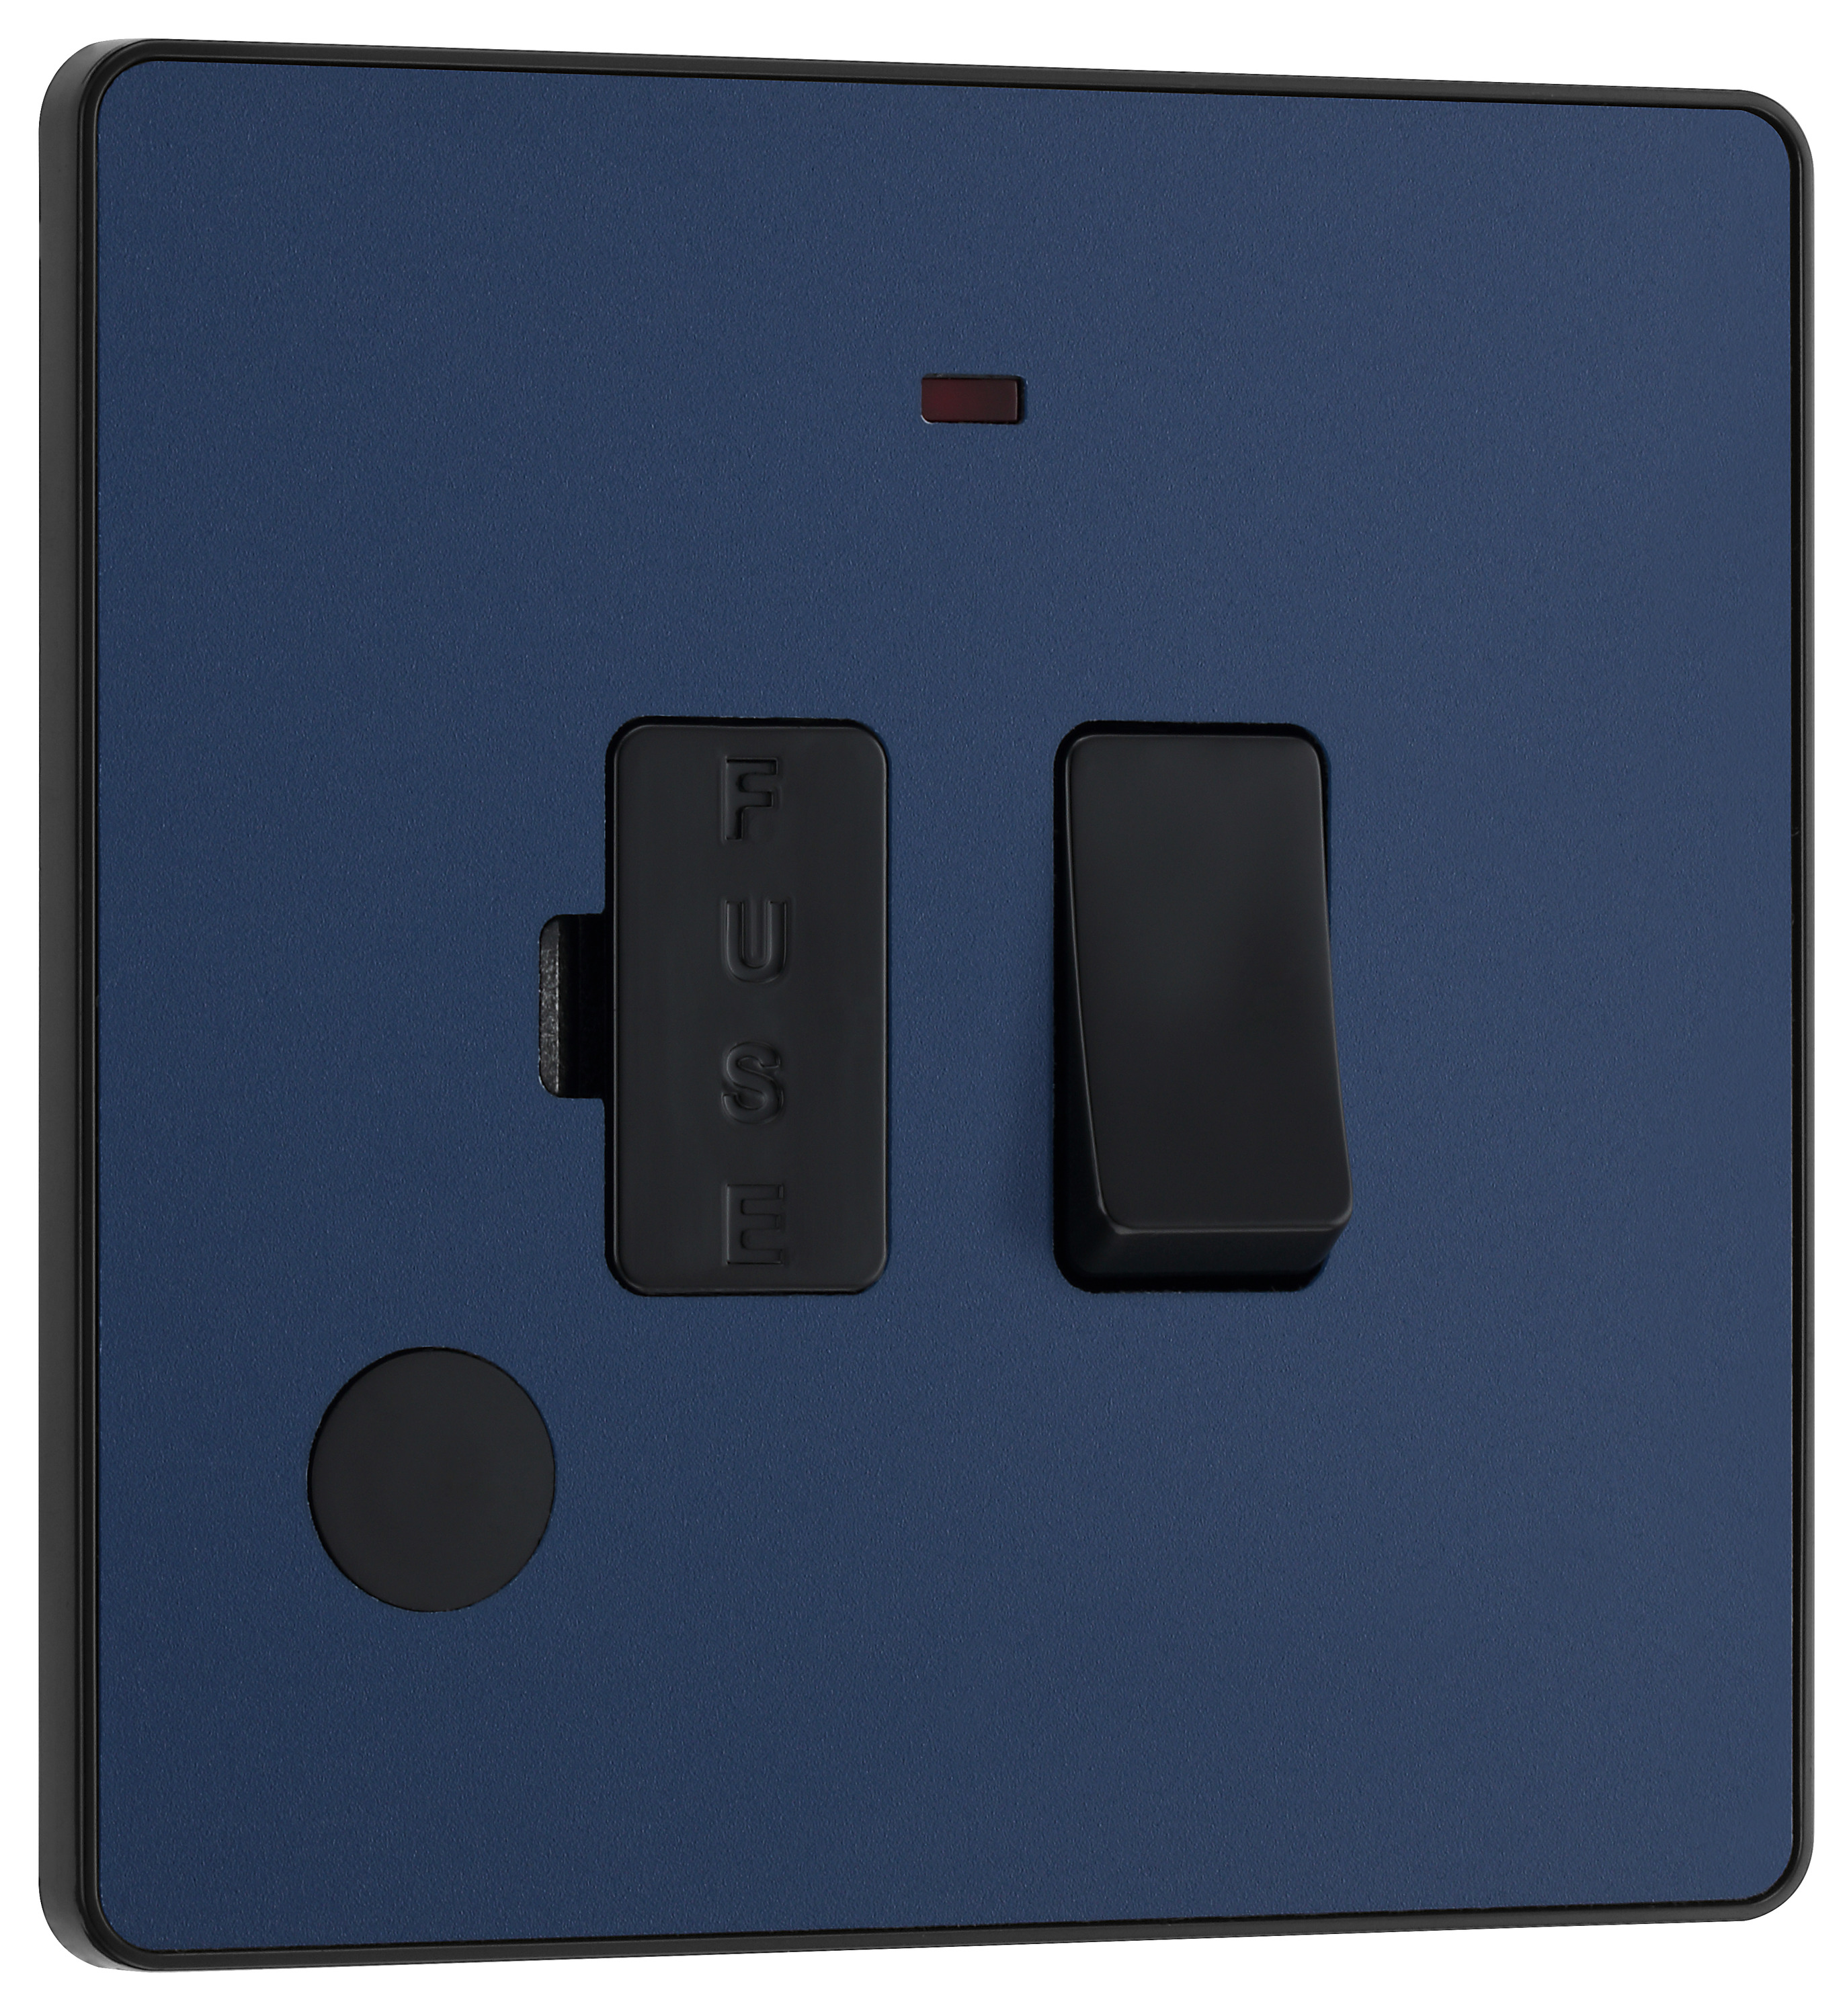 BG Evolve Matt Blue 13A Switched Fused Connection Unit with Power Led Indicator & Flex Outlet